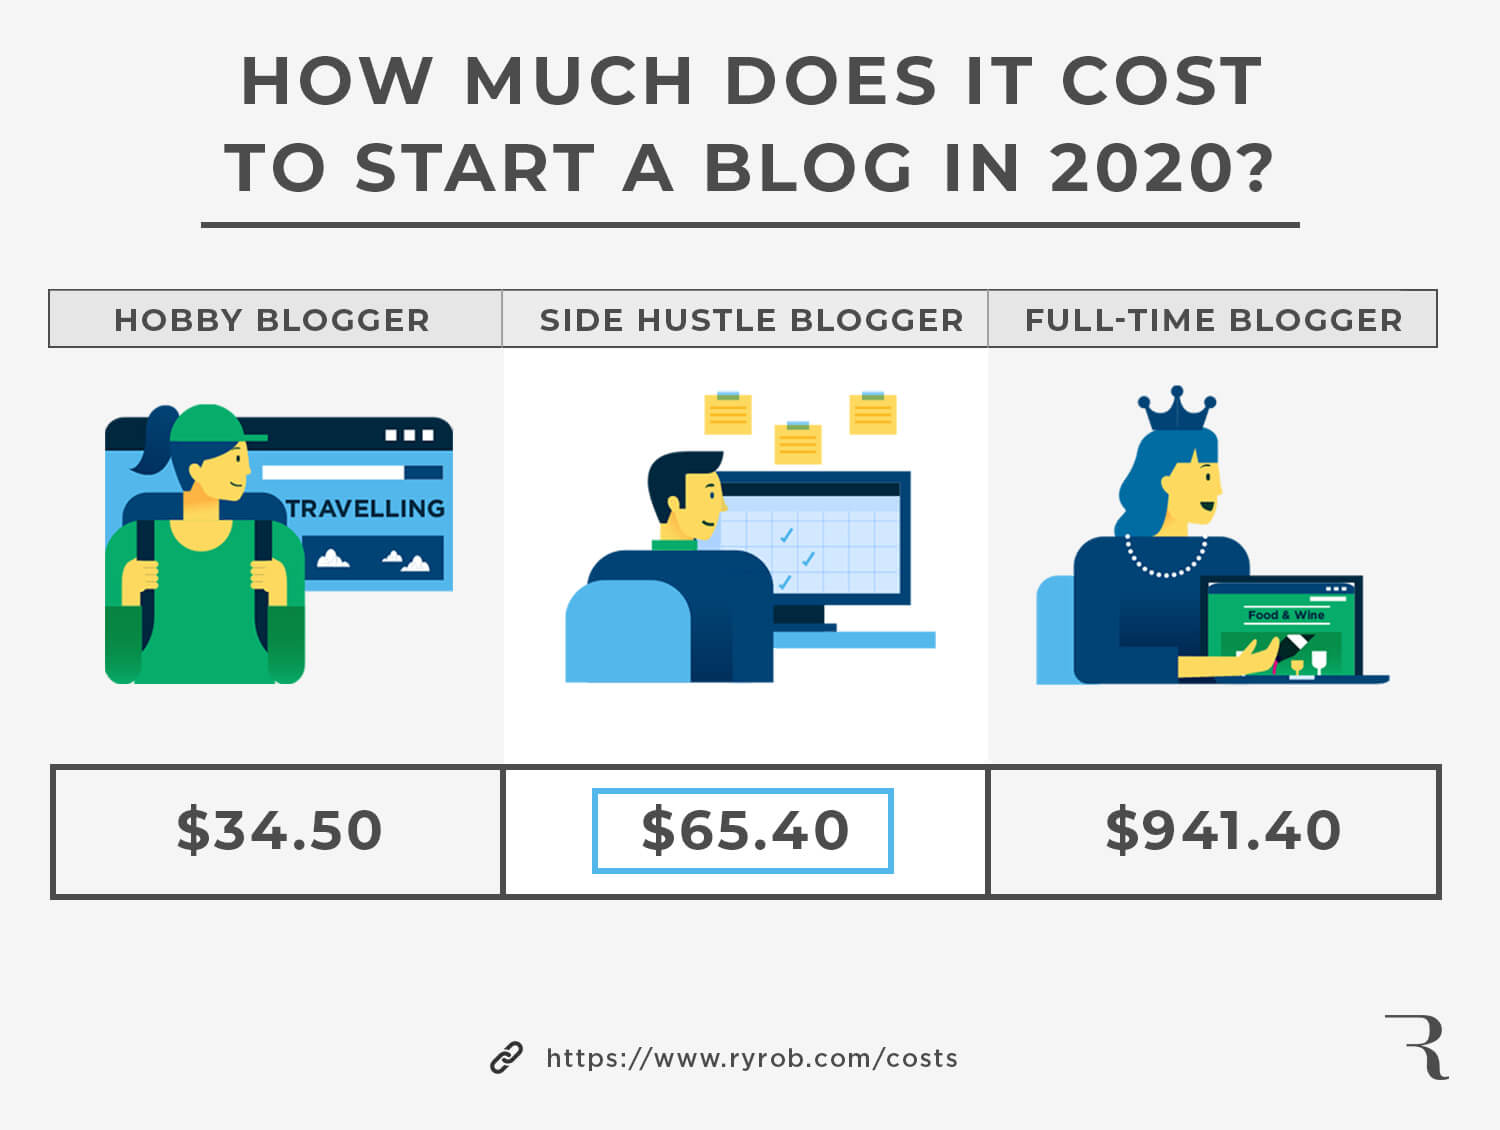 How Much Does it Cost to Start a Blog This Year? Infographic Answer